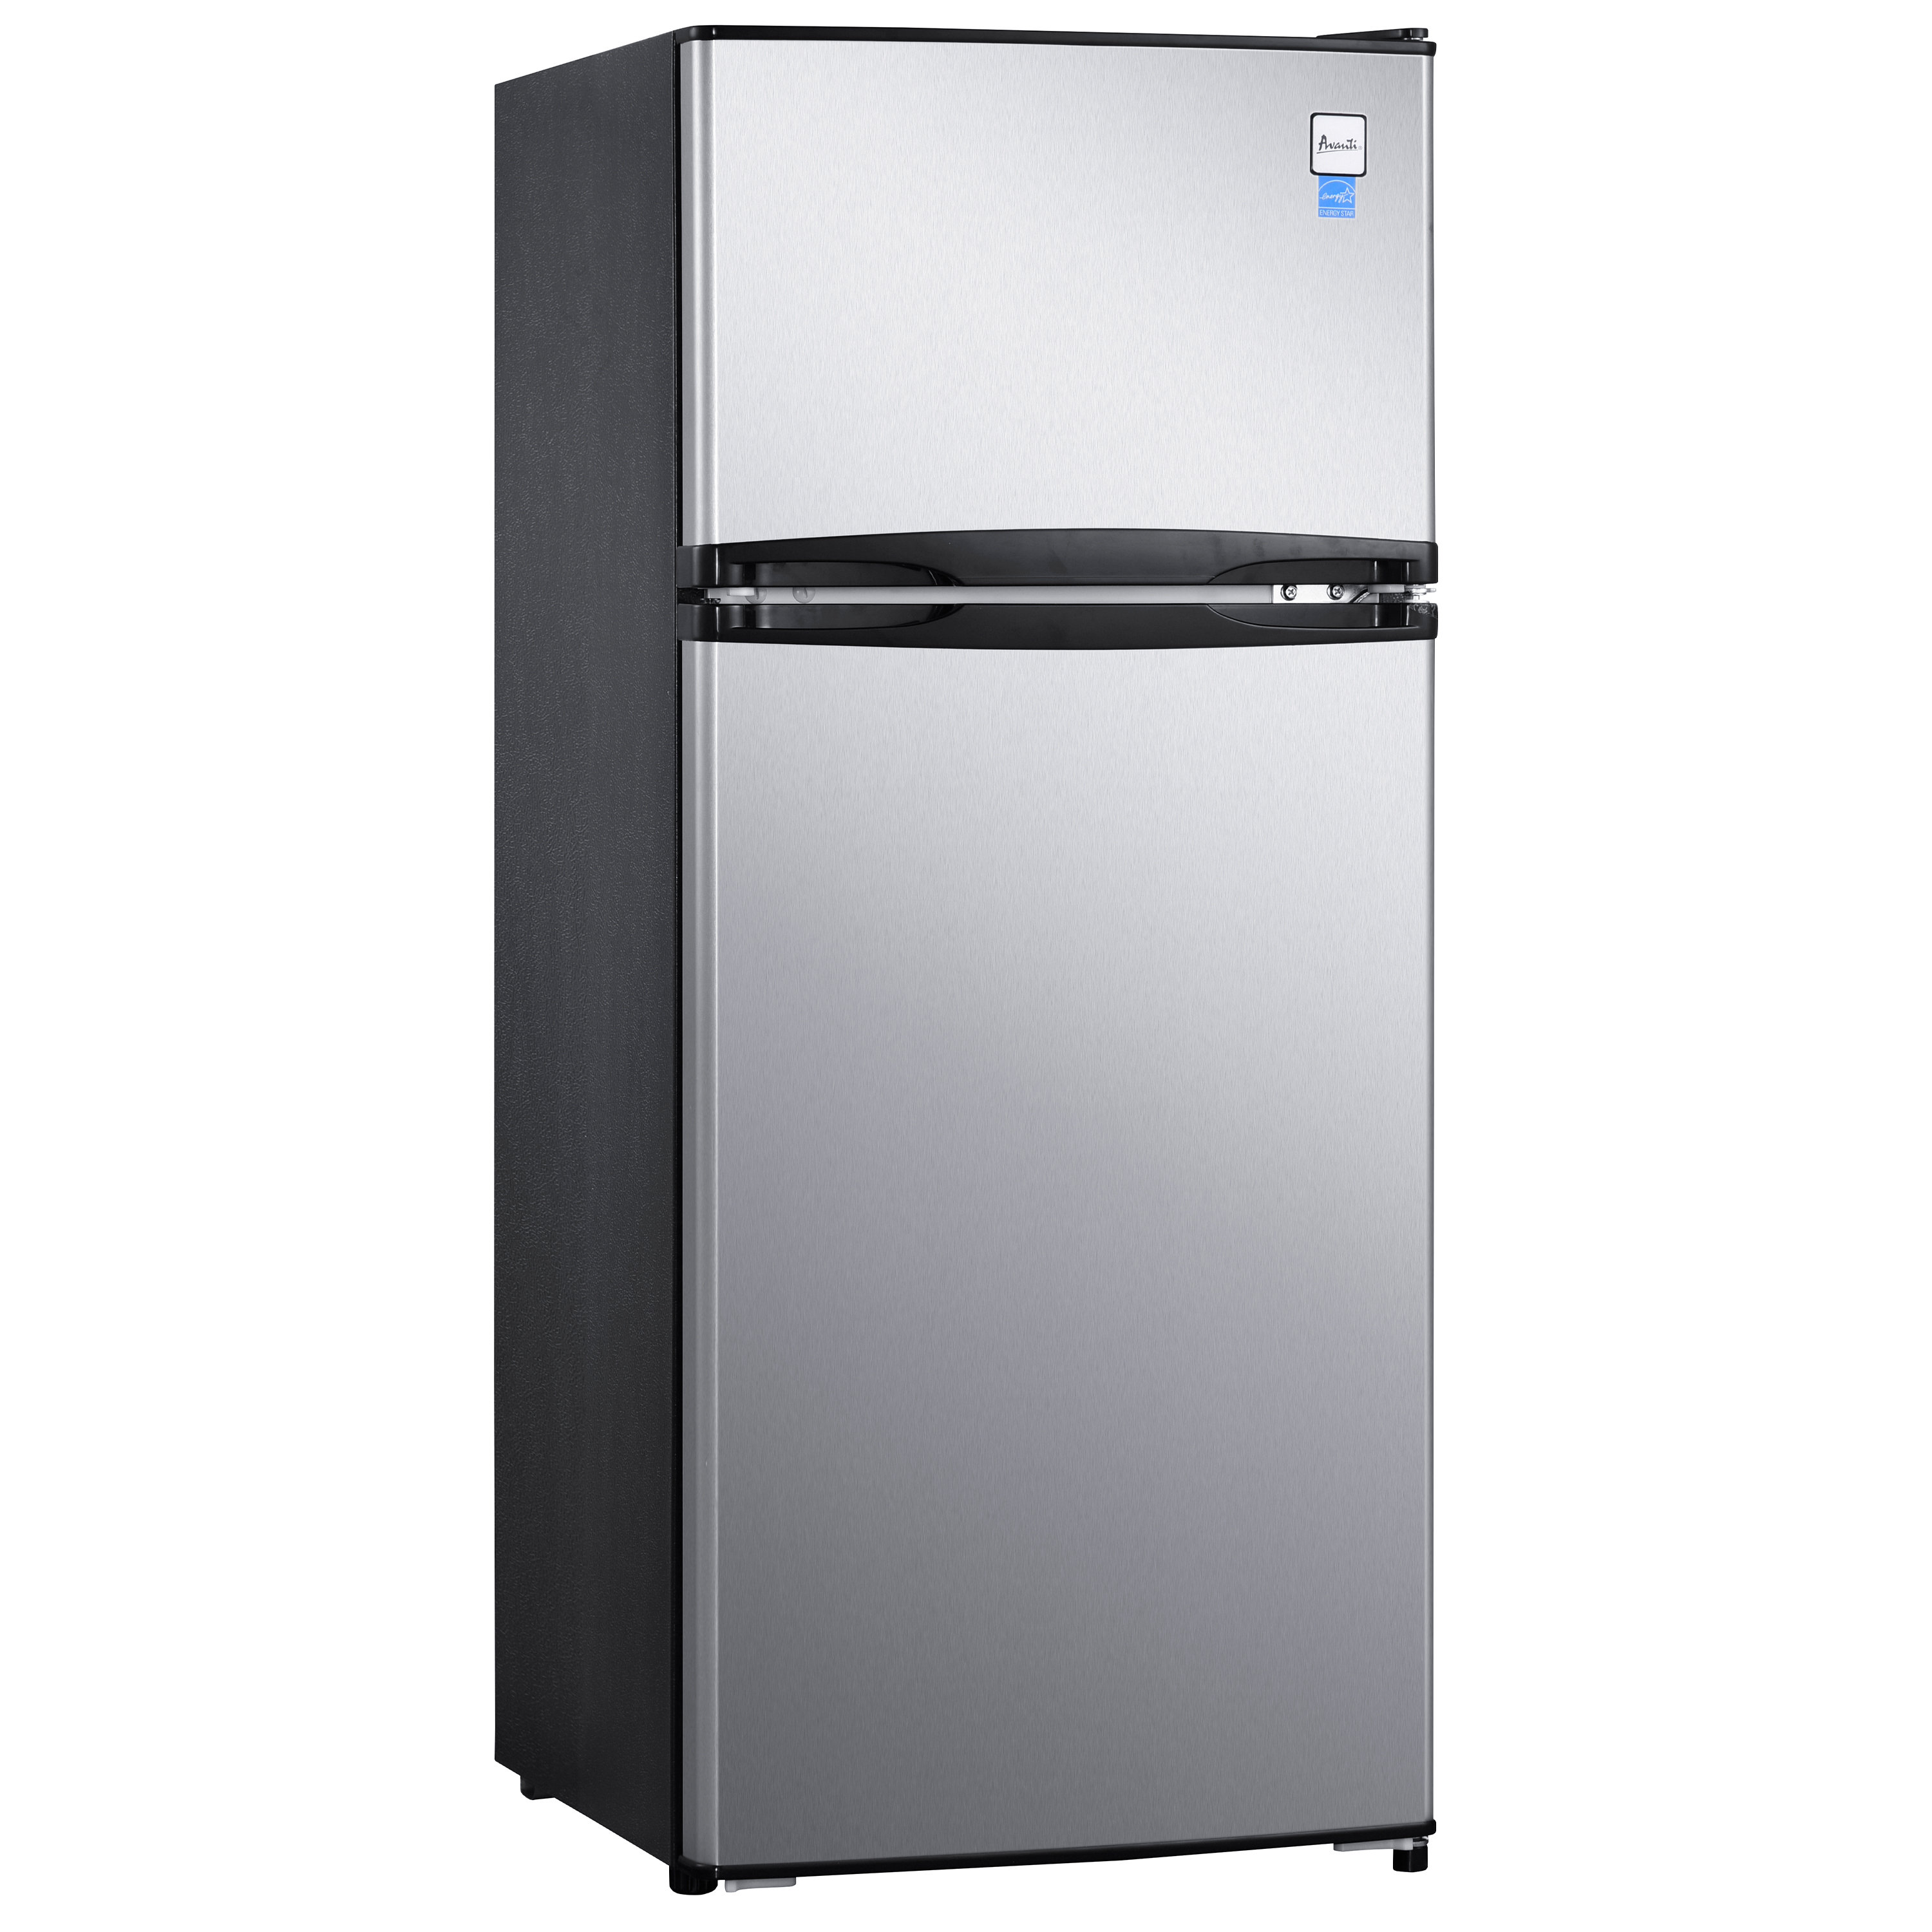 Avanti Energy Star 3.1 Cu. Ft. Two Door Compact Refrigerator/Freezer -  Black and Stainless Steel 